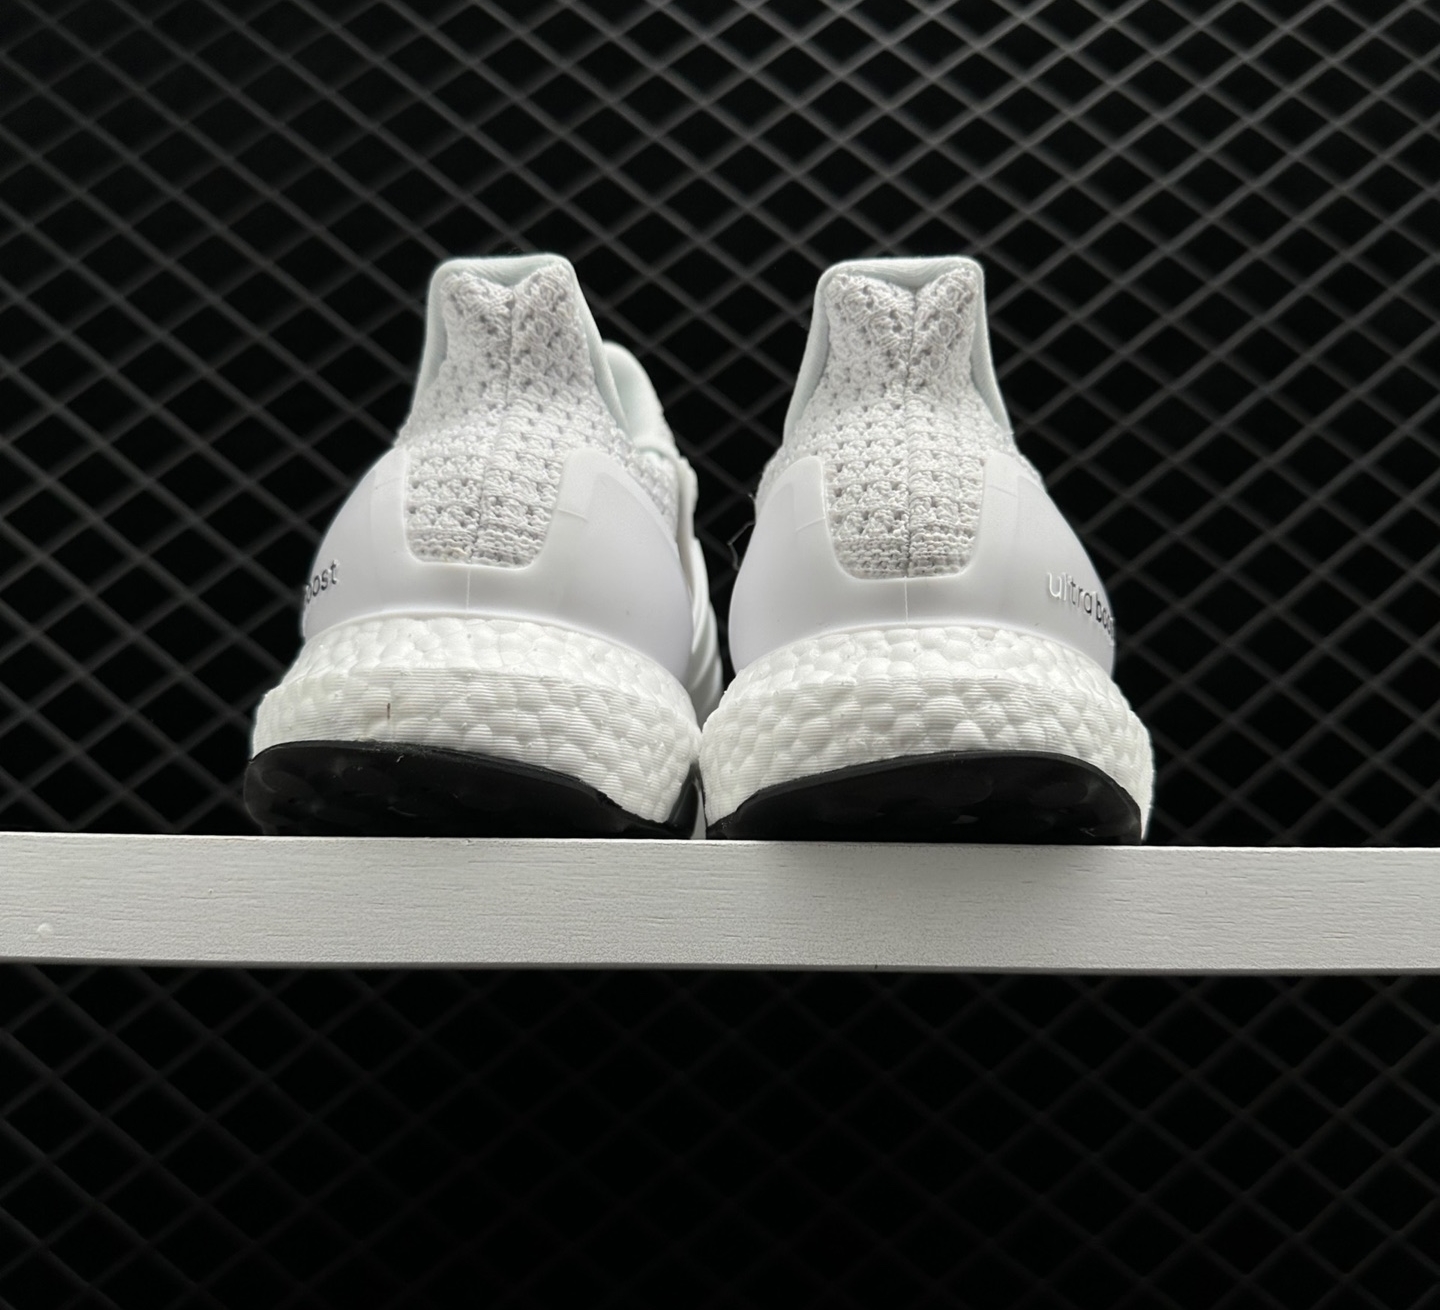 Adidas UltraBoost 2.0 Limited 'White Reflective' BB3928 - Premium Performance Sneakers